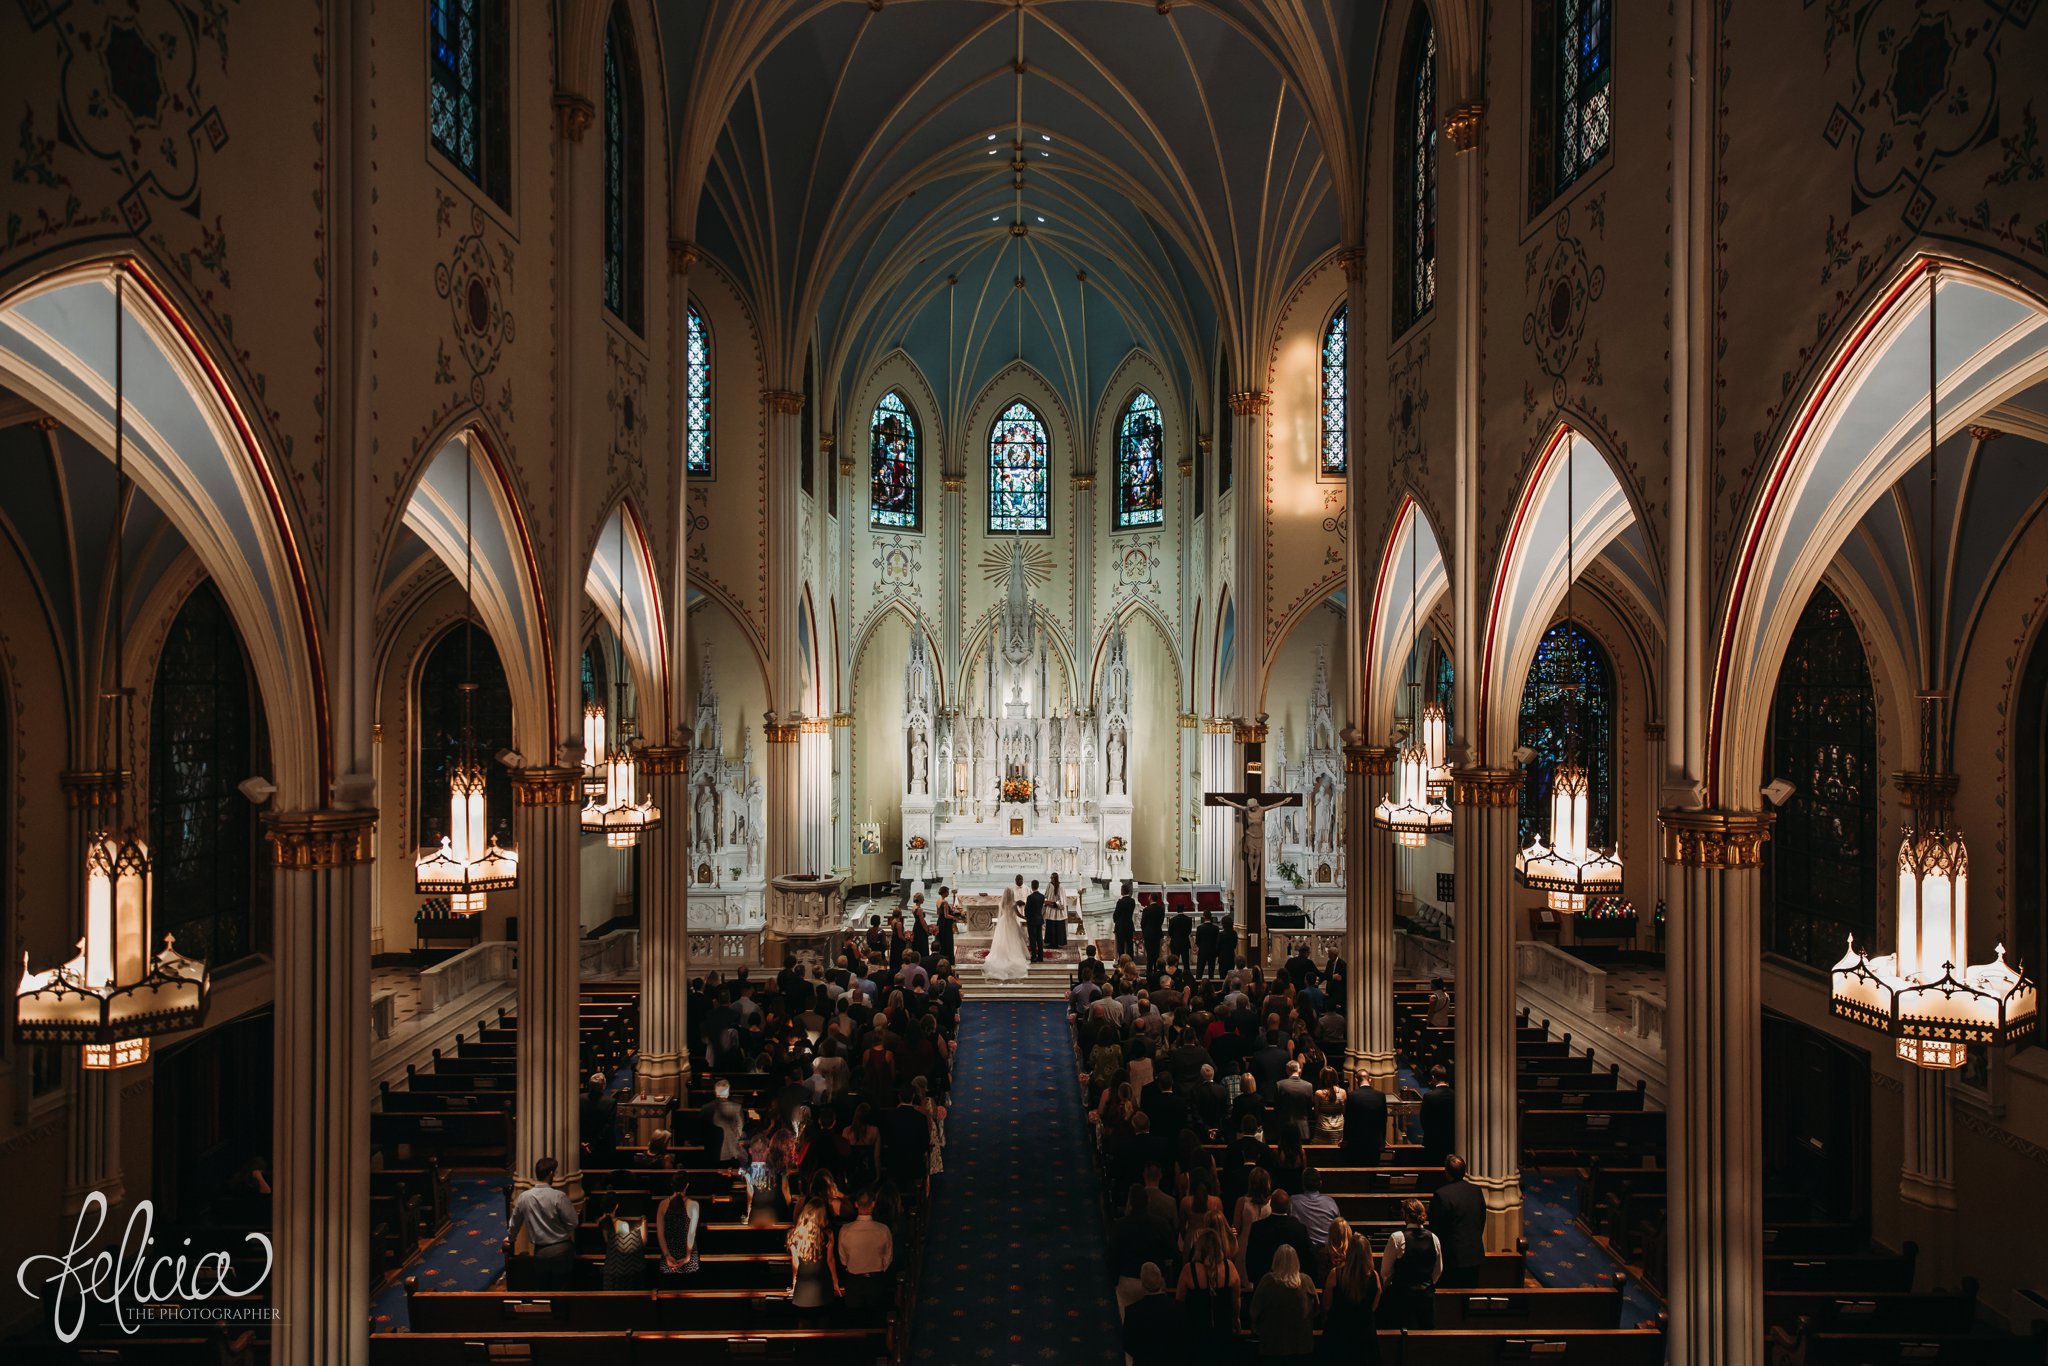 images by feliciathephotographer.com | wedding photographer | kansas city | redemptorist | classic | catholic | our lady of perpetual help | church | ceremony | bride and groom | praying | romantic lighting |